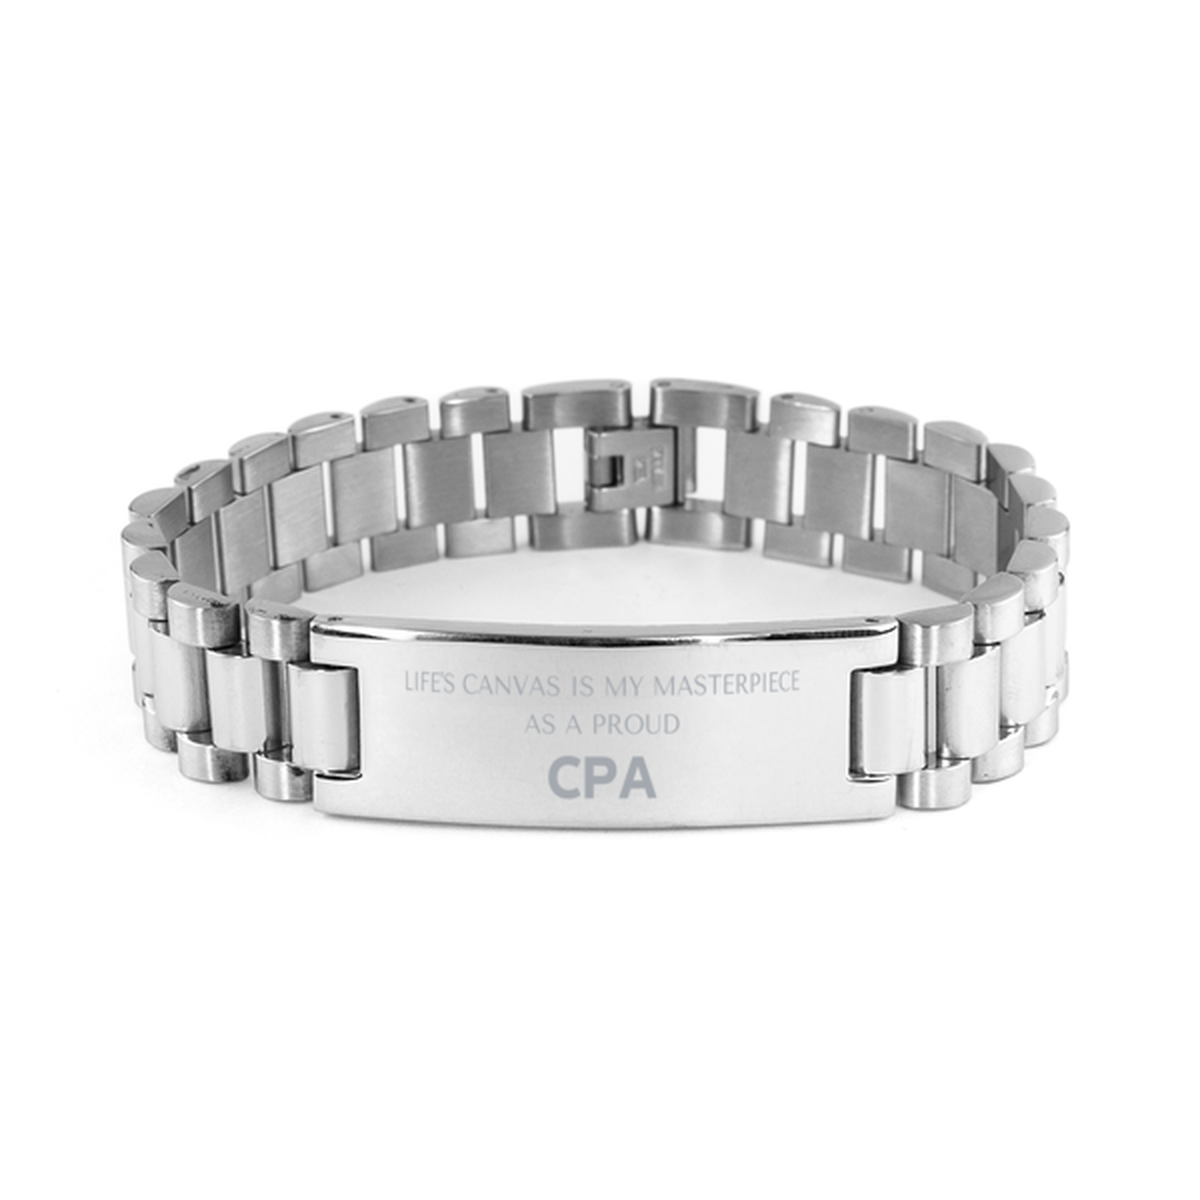 Proud CPA Gifts, Life's canvas is my masterpiece, Epic Birthday Christmas Unique Ladder Stainless Steel Bracelet For CPA, Coworkers, Men, Women, Friends